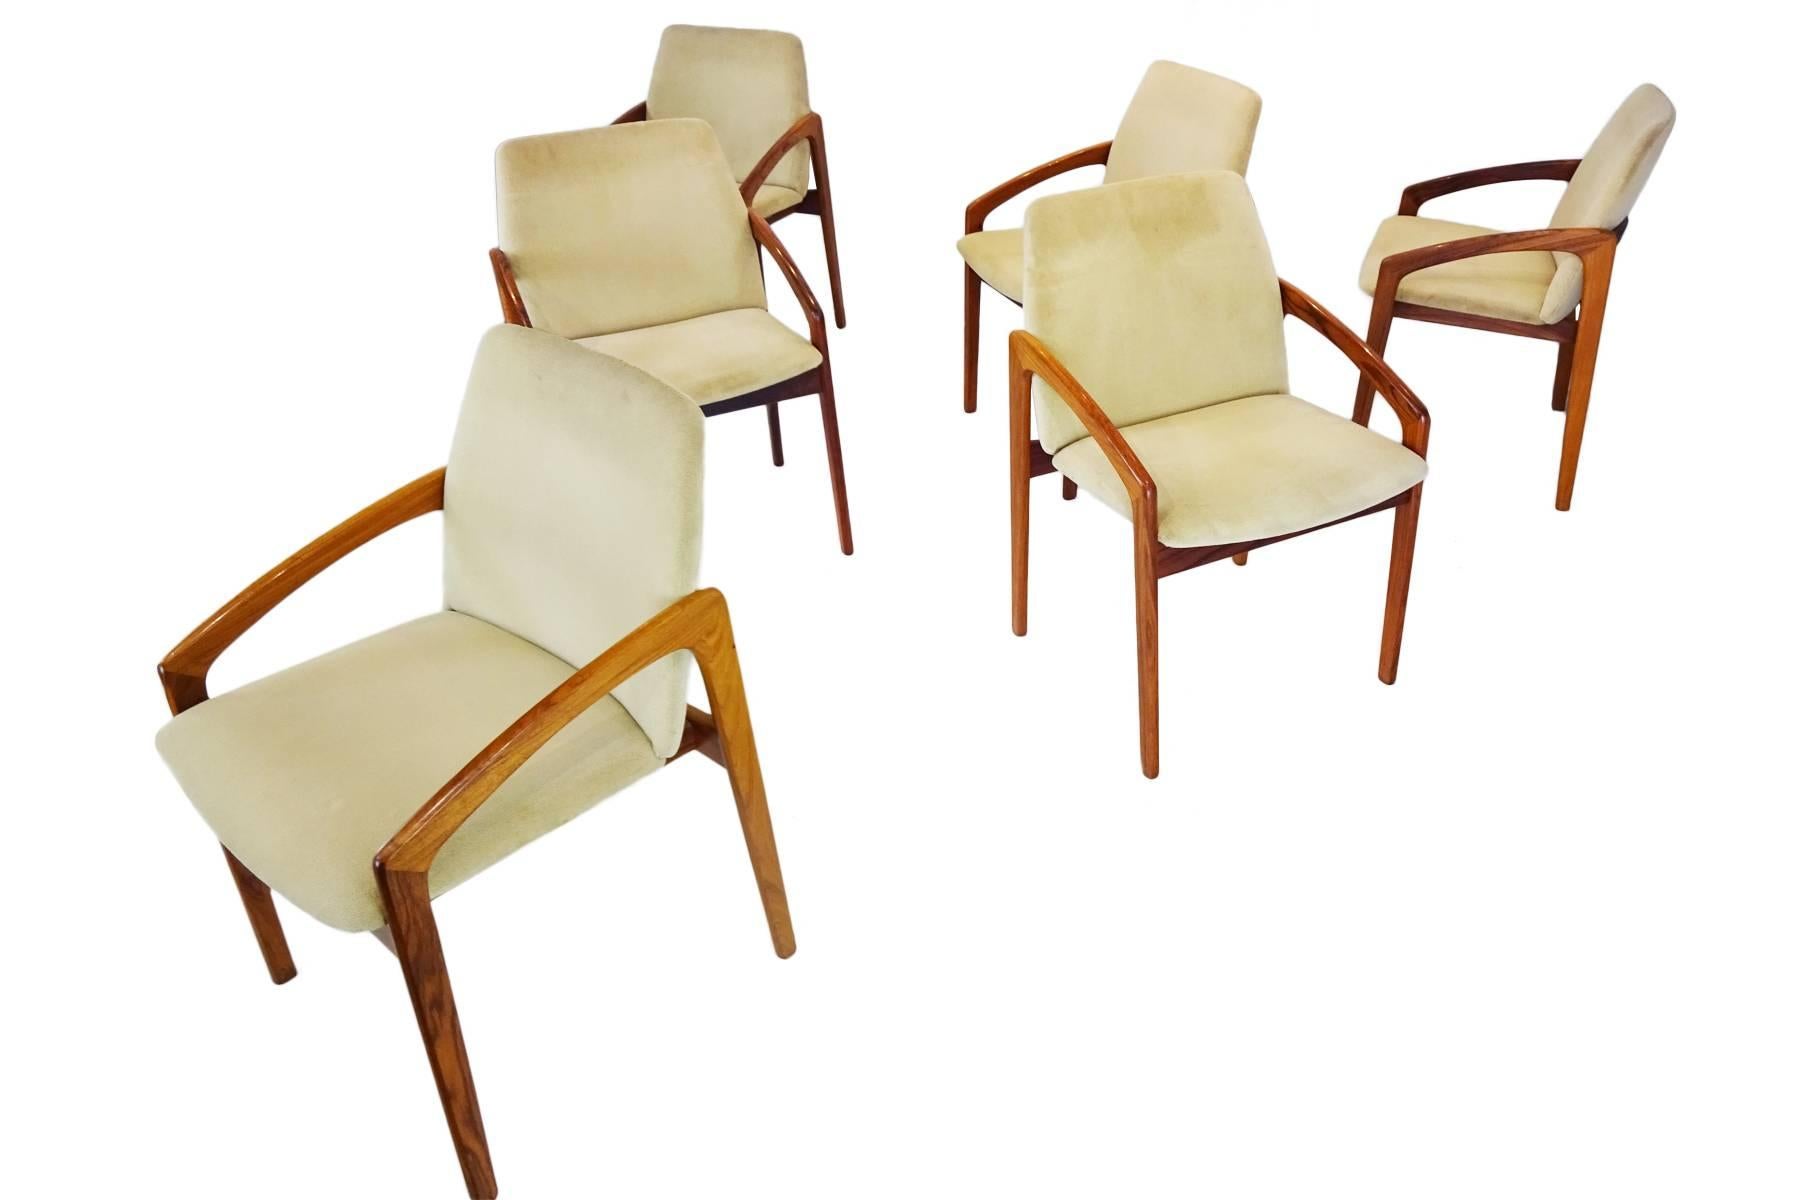 Born in 1929 Kristiansen is often lauded as one of the iconic Danish mid-century designers. Like many of the great Danish designers of the time he apprenticed in cabinetmaking and after studying under Kaare Klint at the prestigious Royal Danish